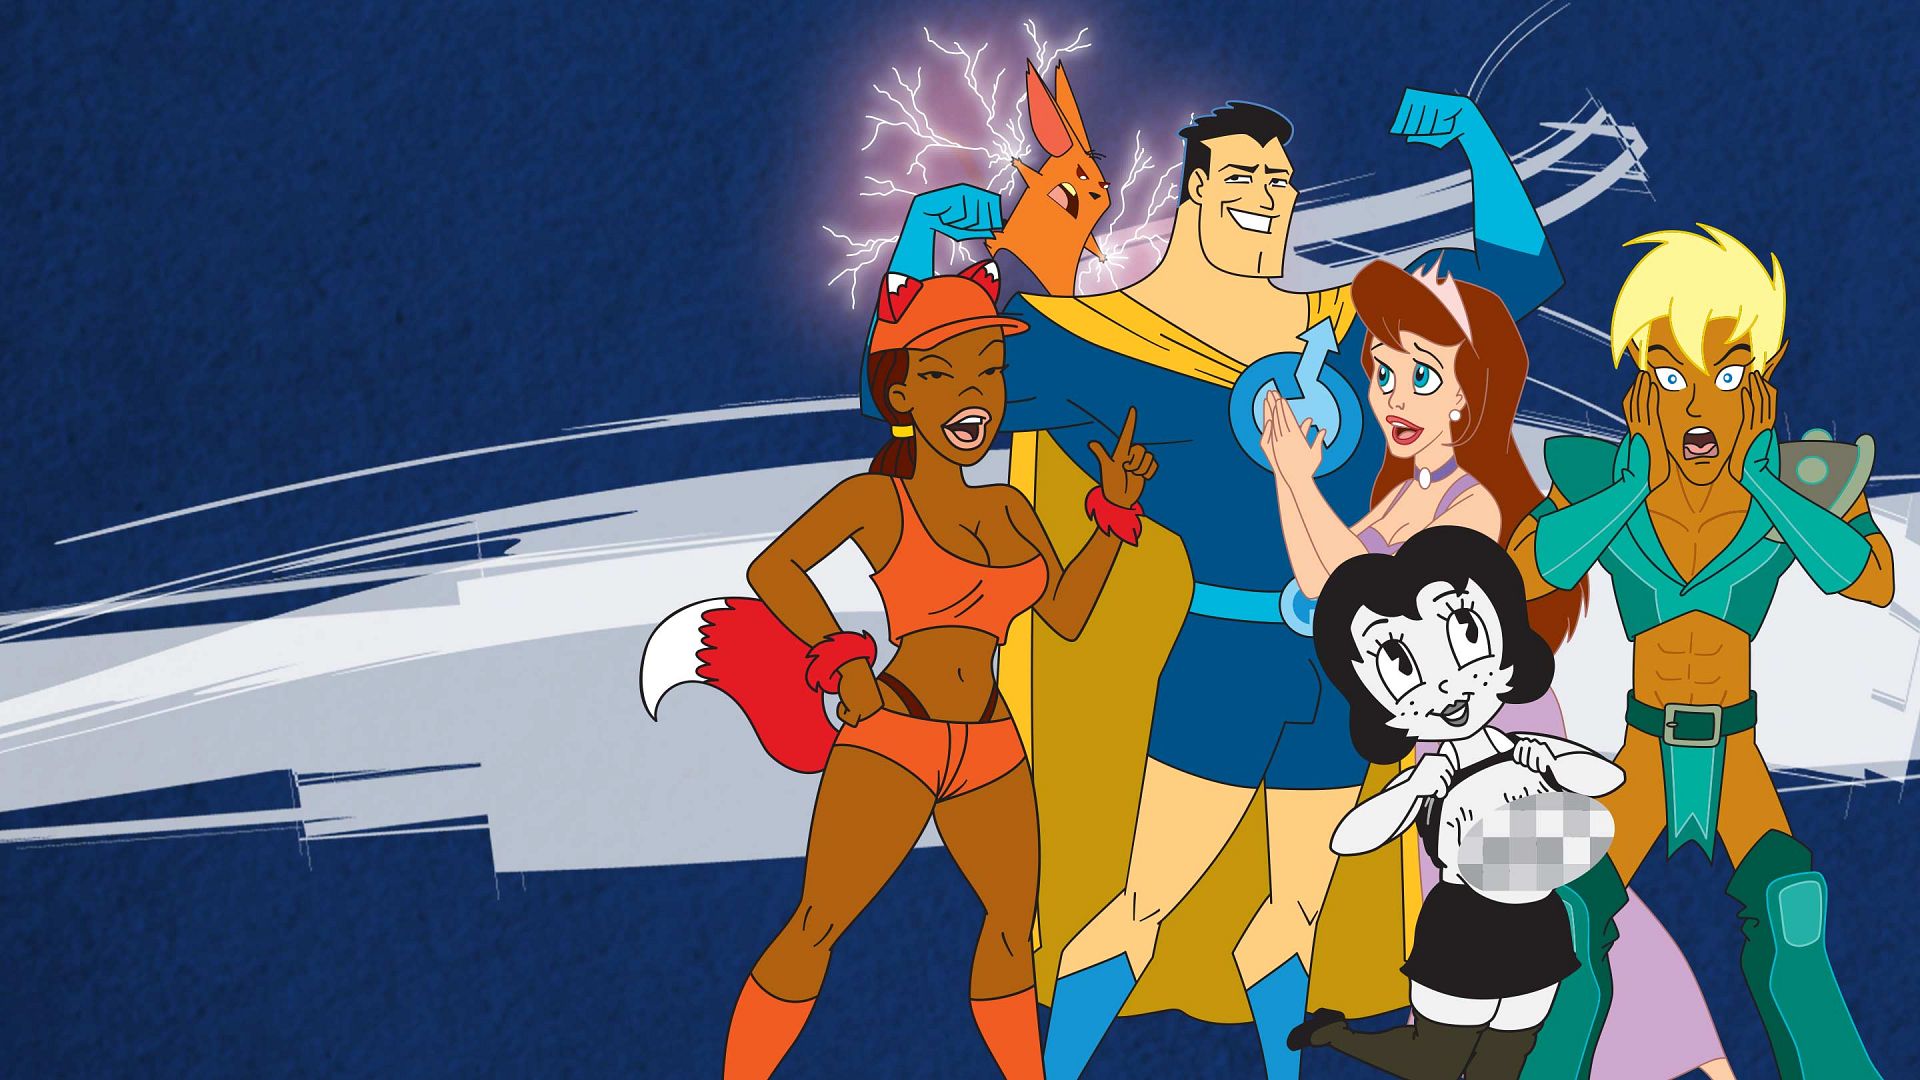 Main characters of the Drawn Together series